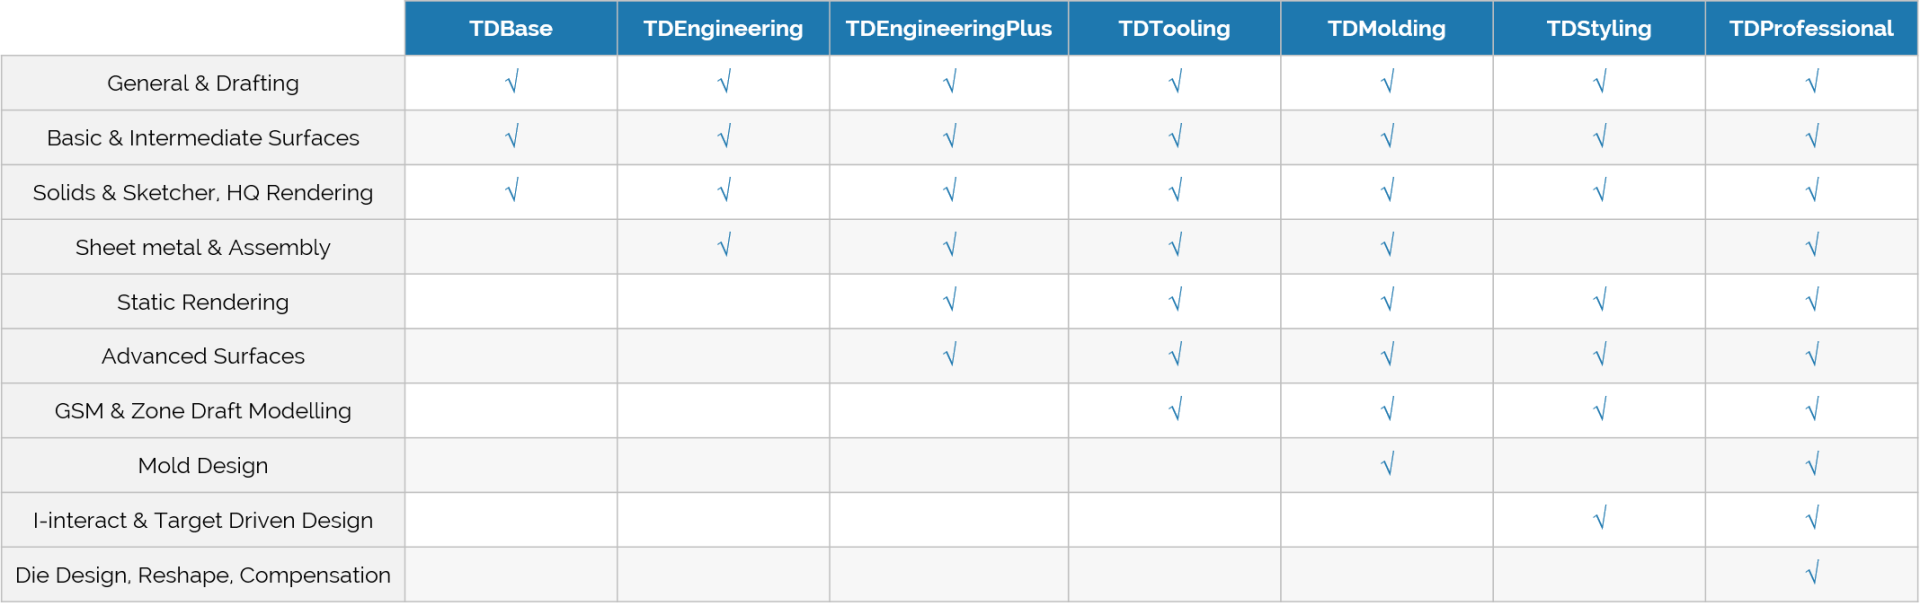 TDproducts-comparison-1